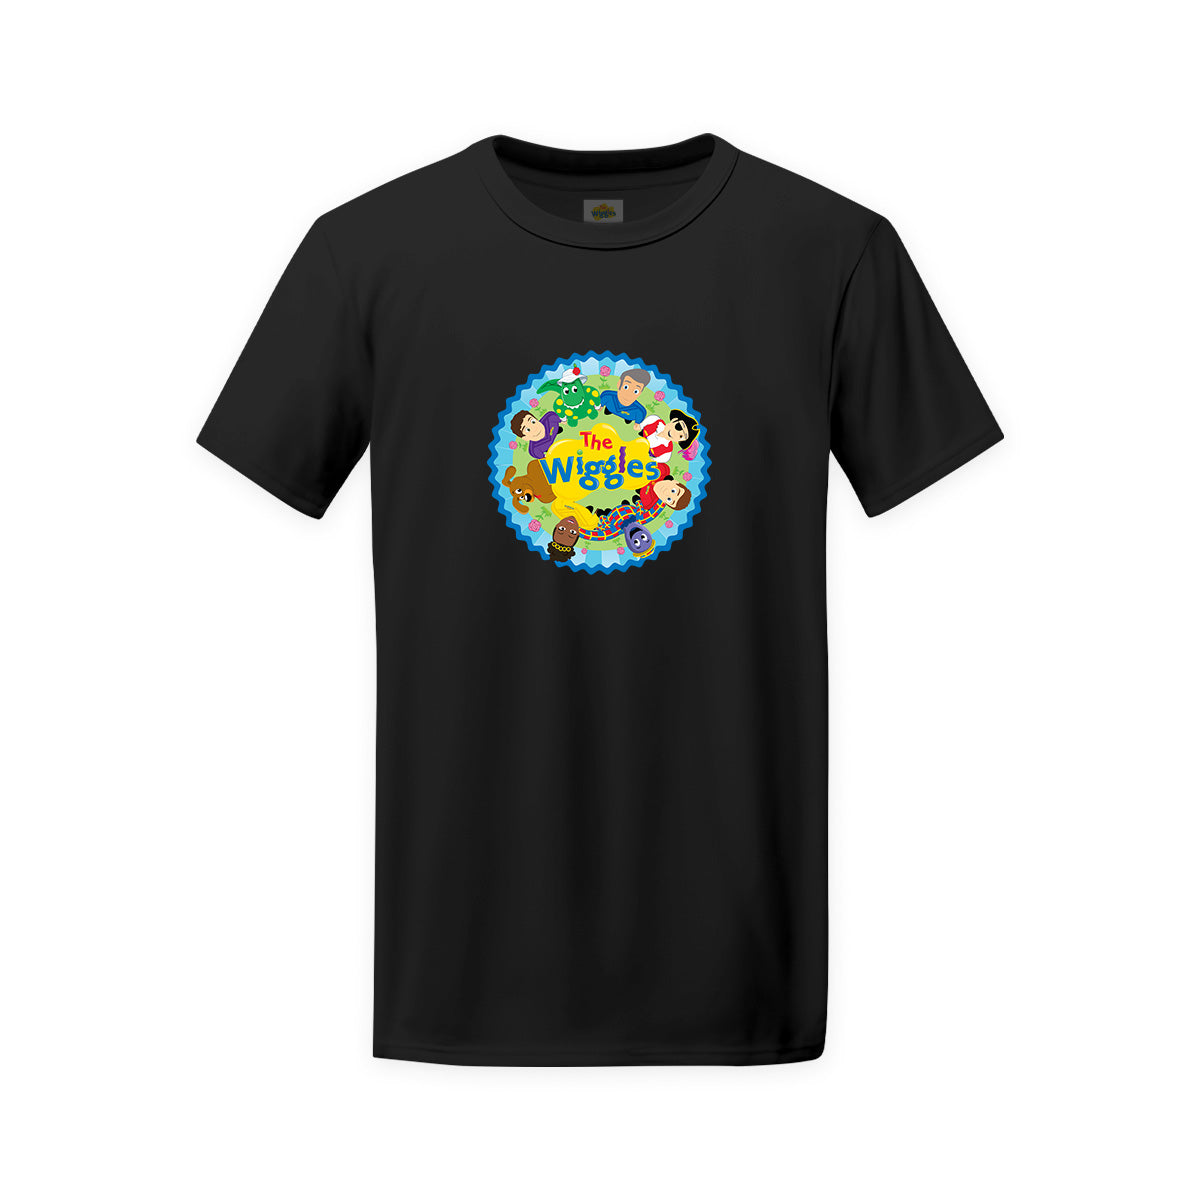 The Wiggles Adult Friends Short Sleeve T-shirt